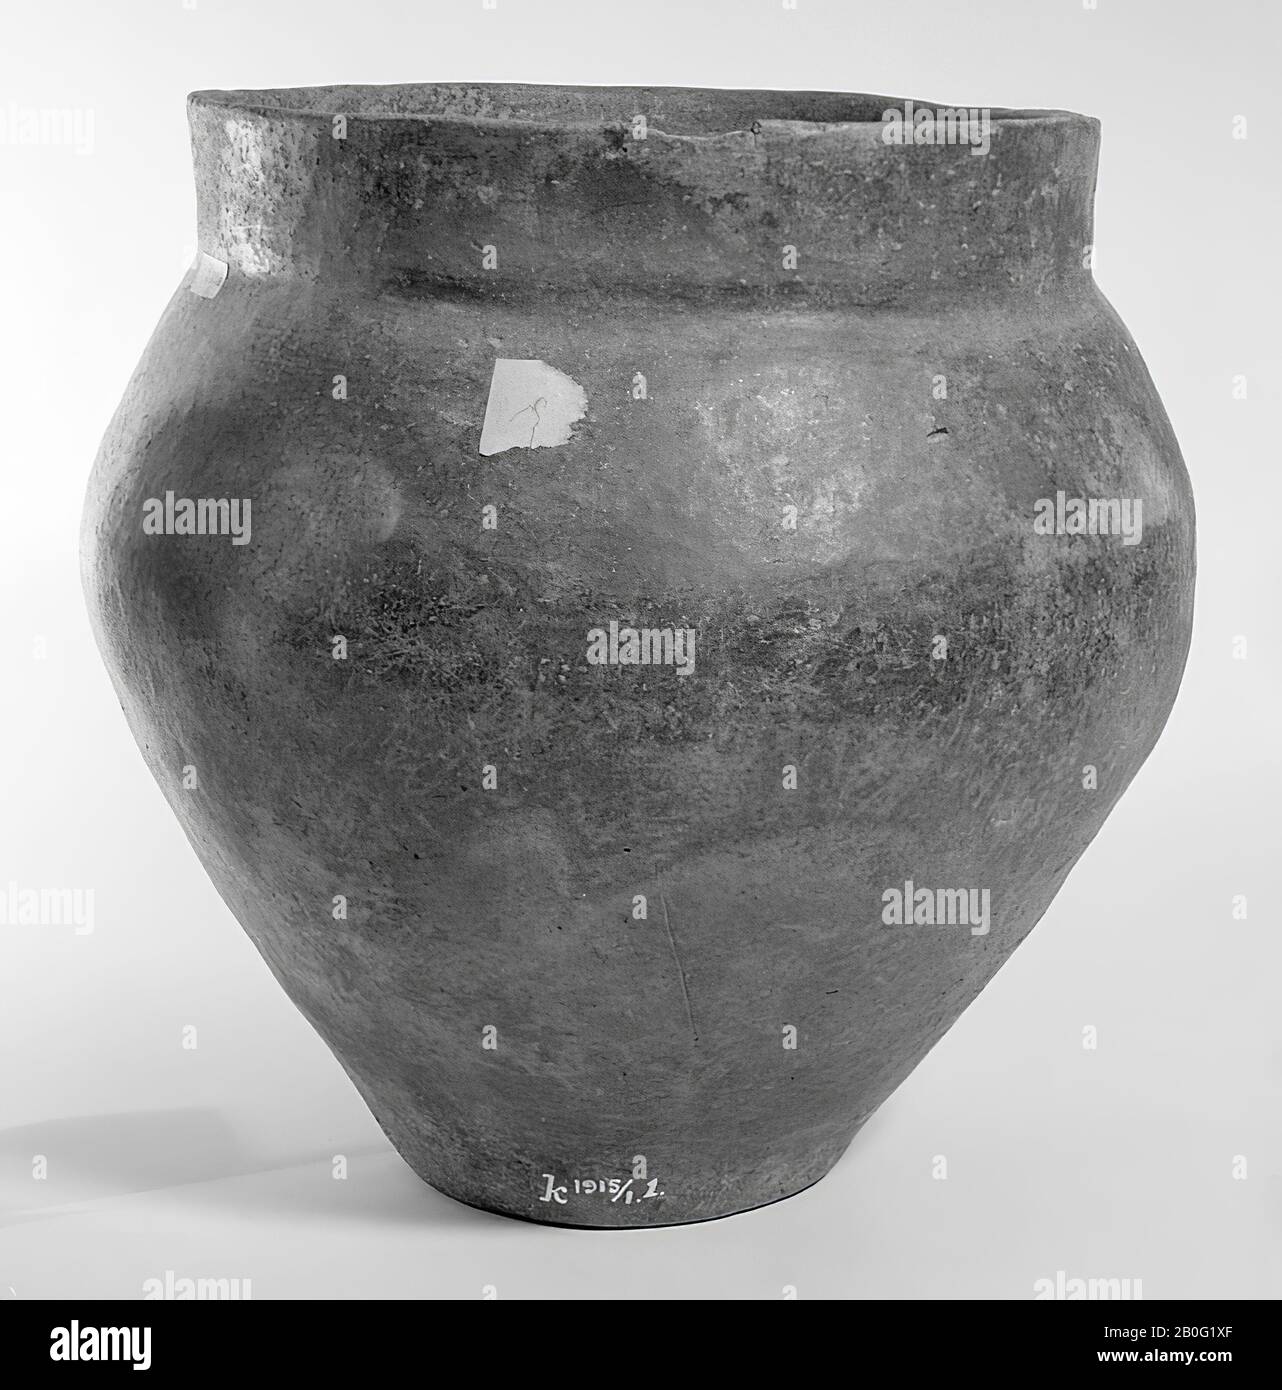 Brown oval urn with raised edge, completely filled with human bones, completely intact, apart from a few chips, urn, earthenware, h: 26 cm, diam: 26 cm, prehistory -800 Stock Photo